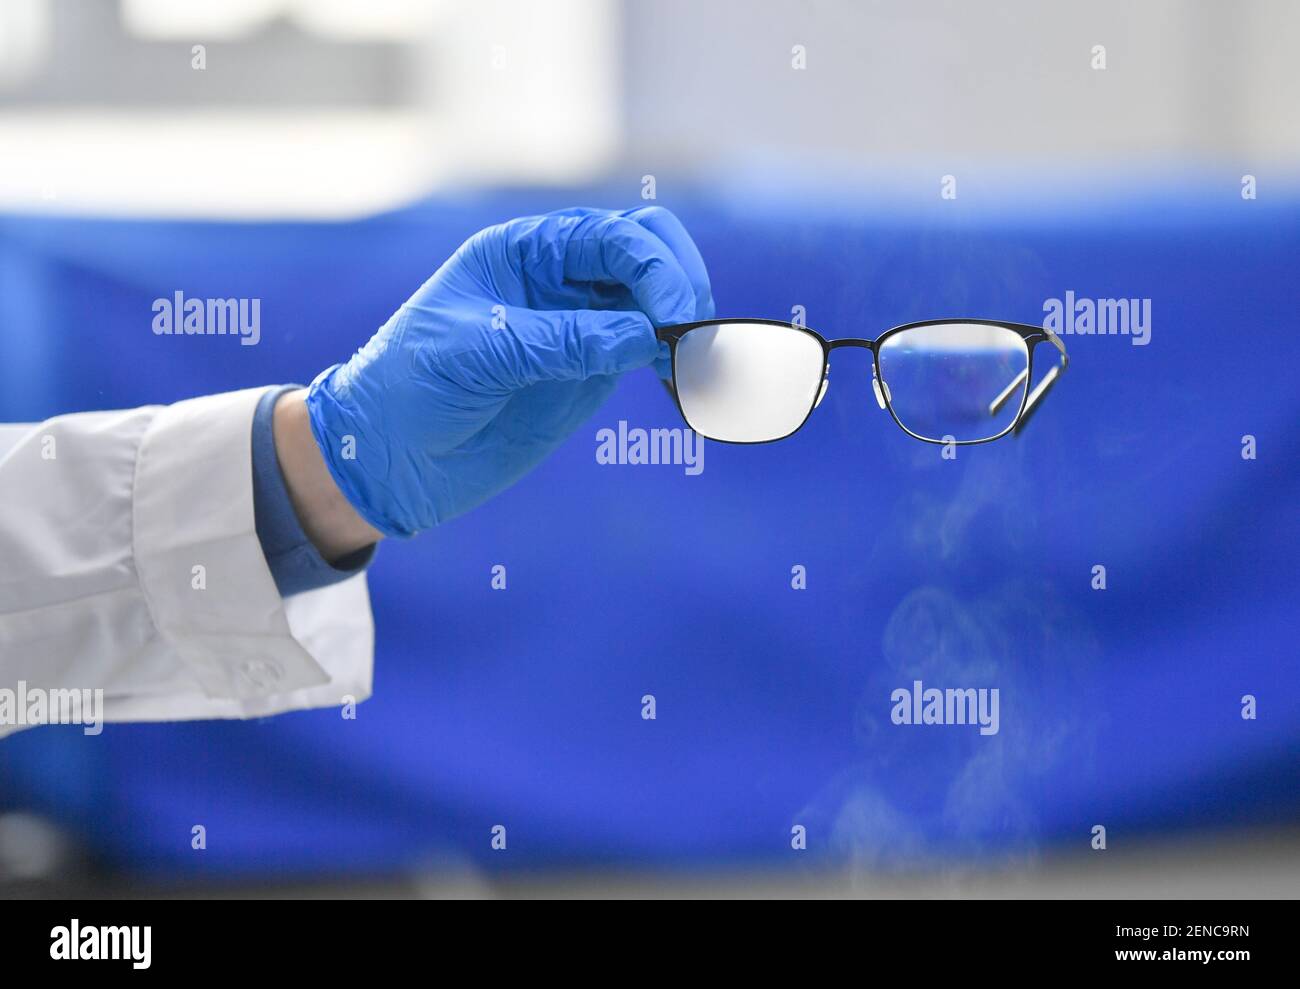 (210226) -- TIANJIN, Feb. 26, 2021 (Xinhua) -- A technician shows a lens treated by hydrophilic modified nano-coating technology and an untreated lens encountering vapor at the Research Center for Surface/Interfacial Micro/Nano-technology, Tsinghua University Tianjin Research Institute for Advanced Equipment, in north China's Tianjin, Feb. 24, 2021. Tsinghua University Tianjin Research Institute for Advanced Equipment was founded in October 2014. It combines the advantages of science, technology, human resources from Tsinghua University and the industrial and regional strength of Tianjin, serv Stock Photo